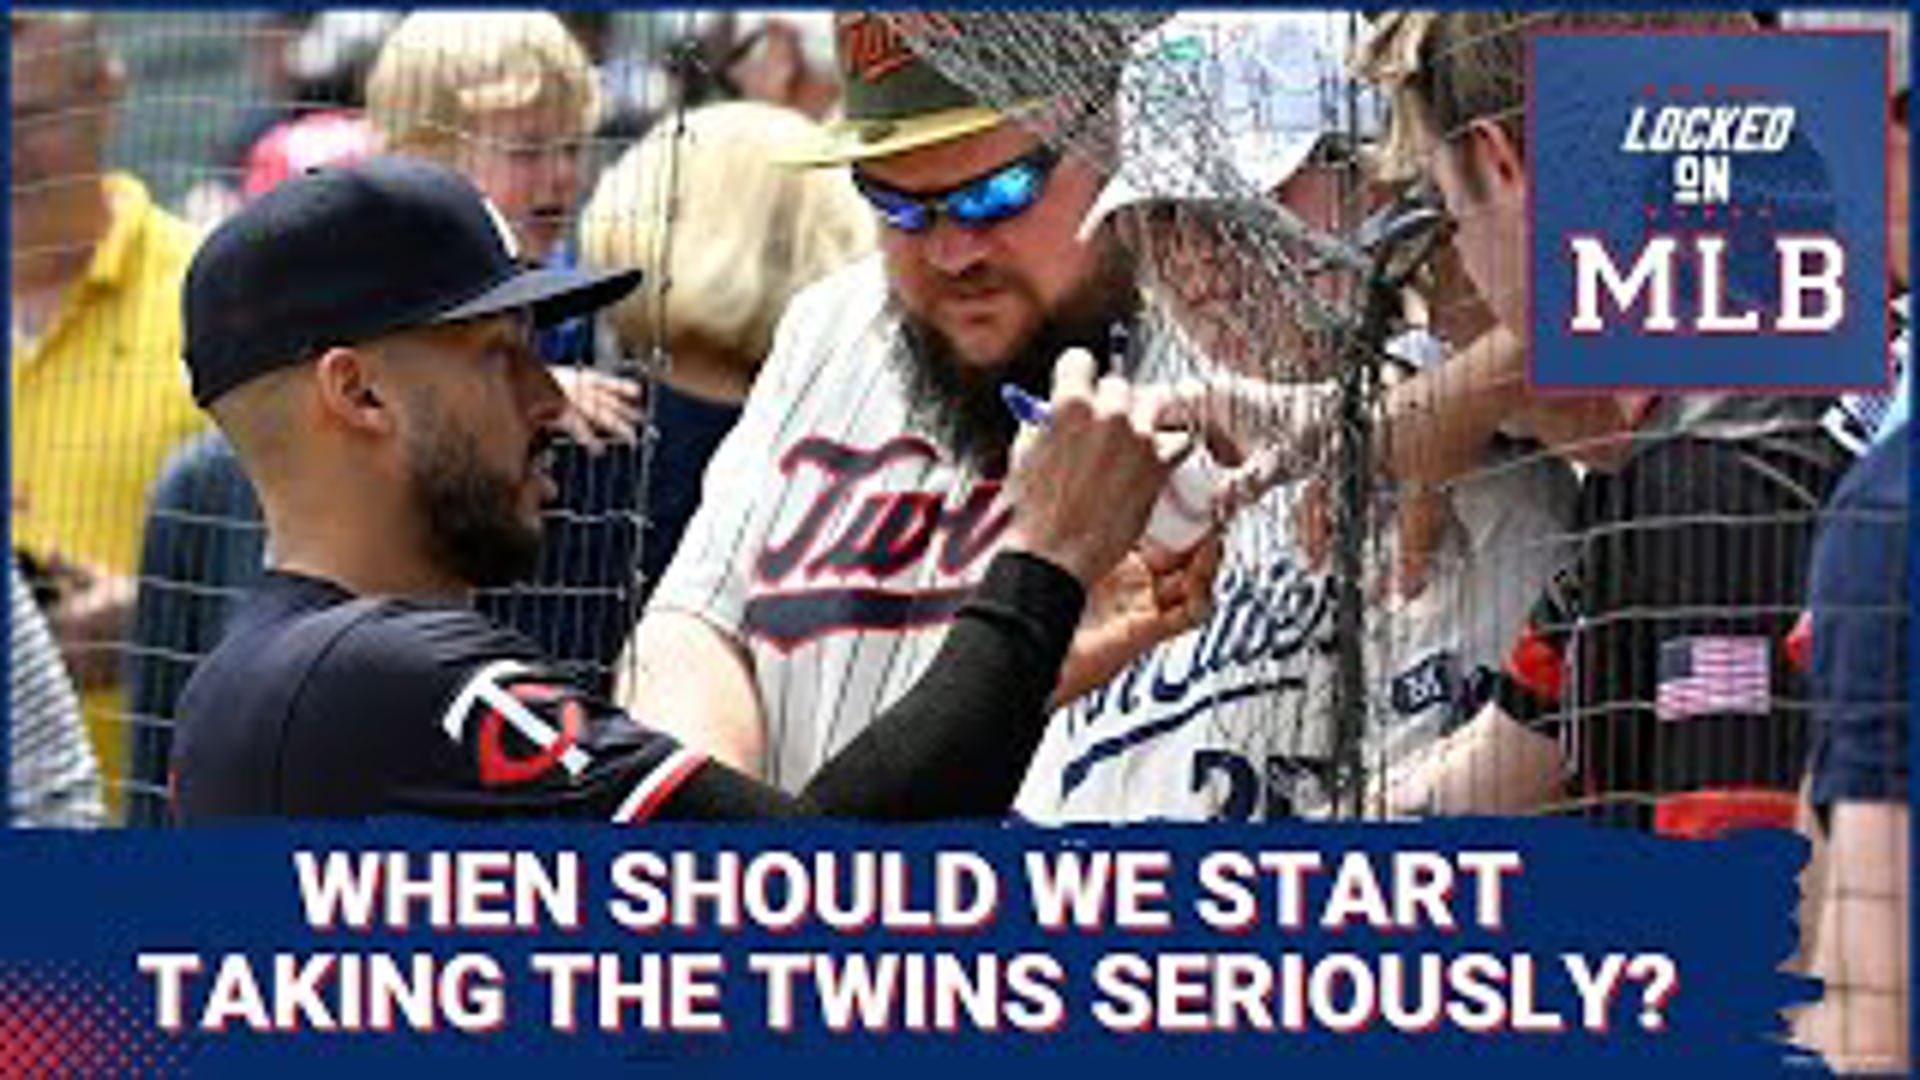 The Twins just keep on winning. And their wild streak has skyrocketed them to 4th place. At what point should we take them seriously?